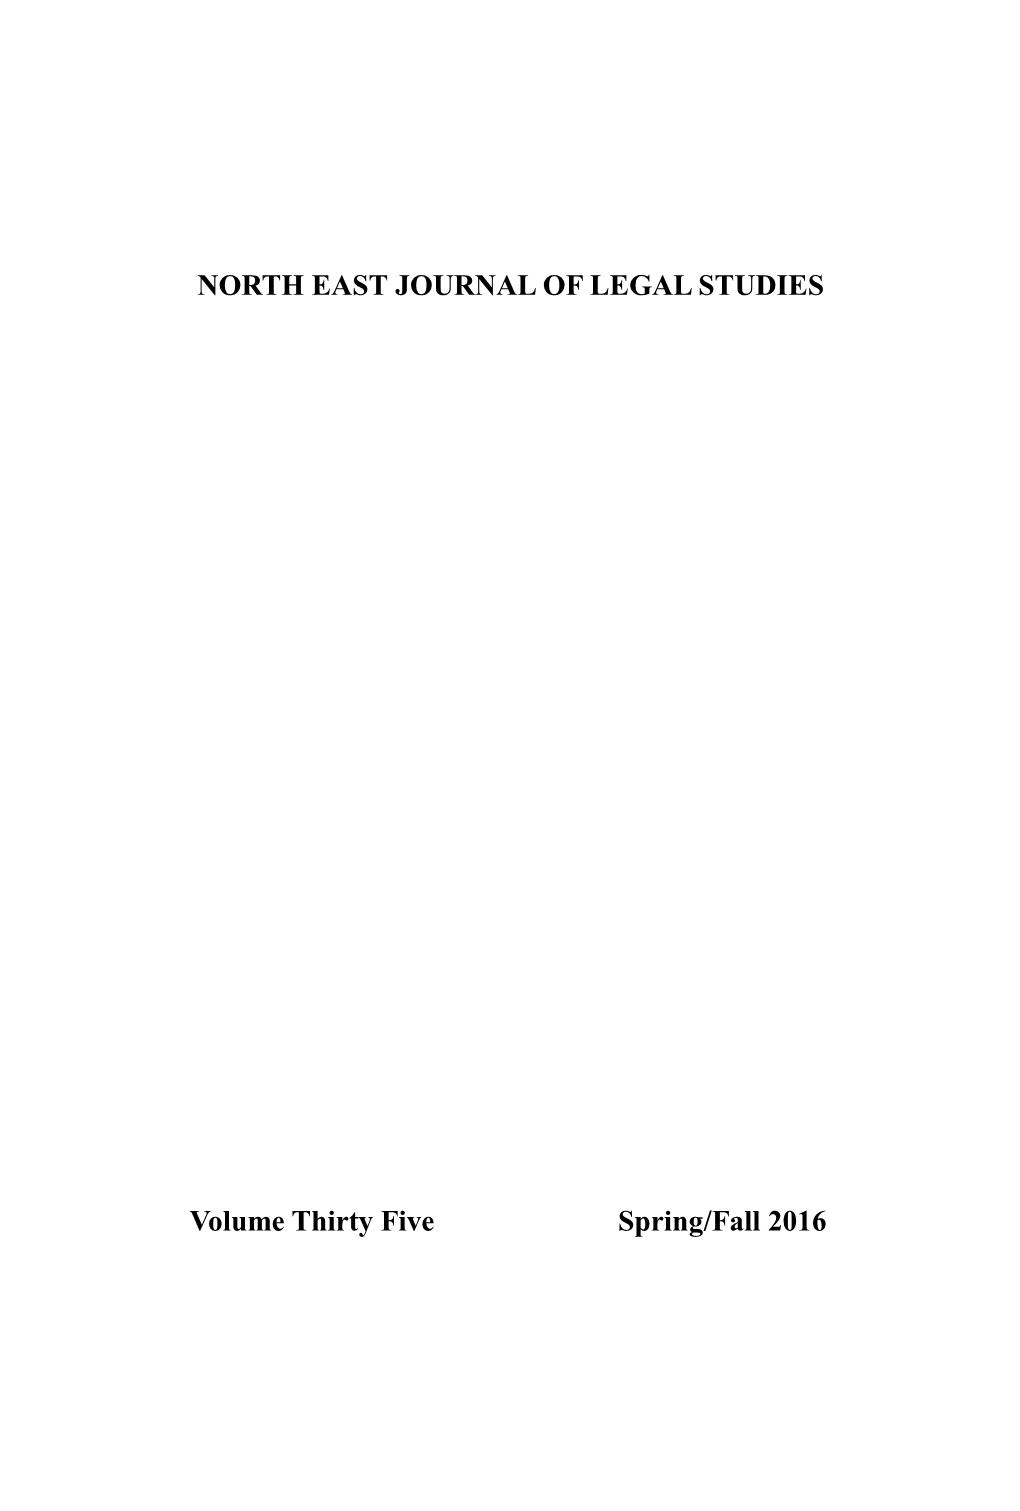 NORTH EAST JOURNAL of LEGAL STUDIES Volume Thirty Five Spring/Fall 2016